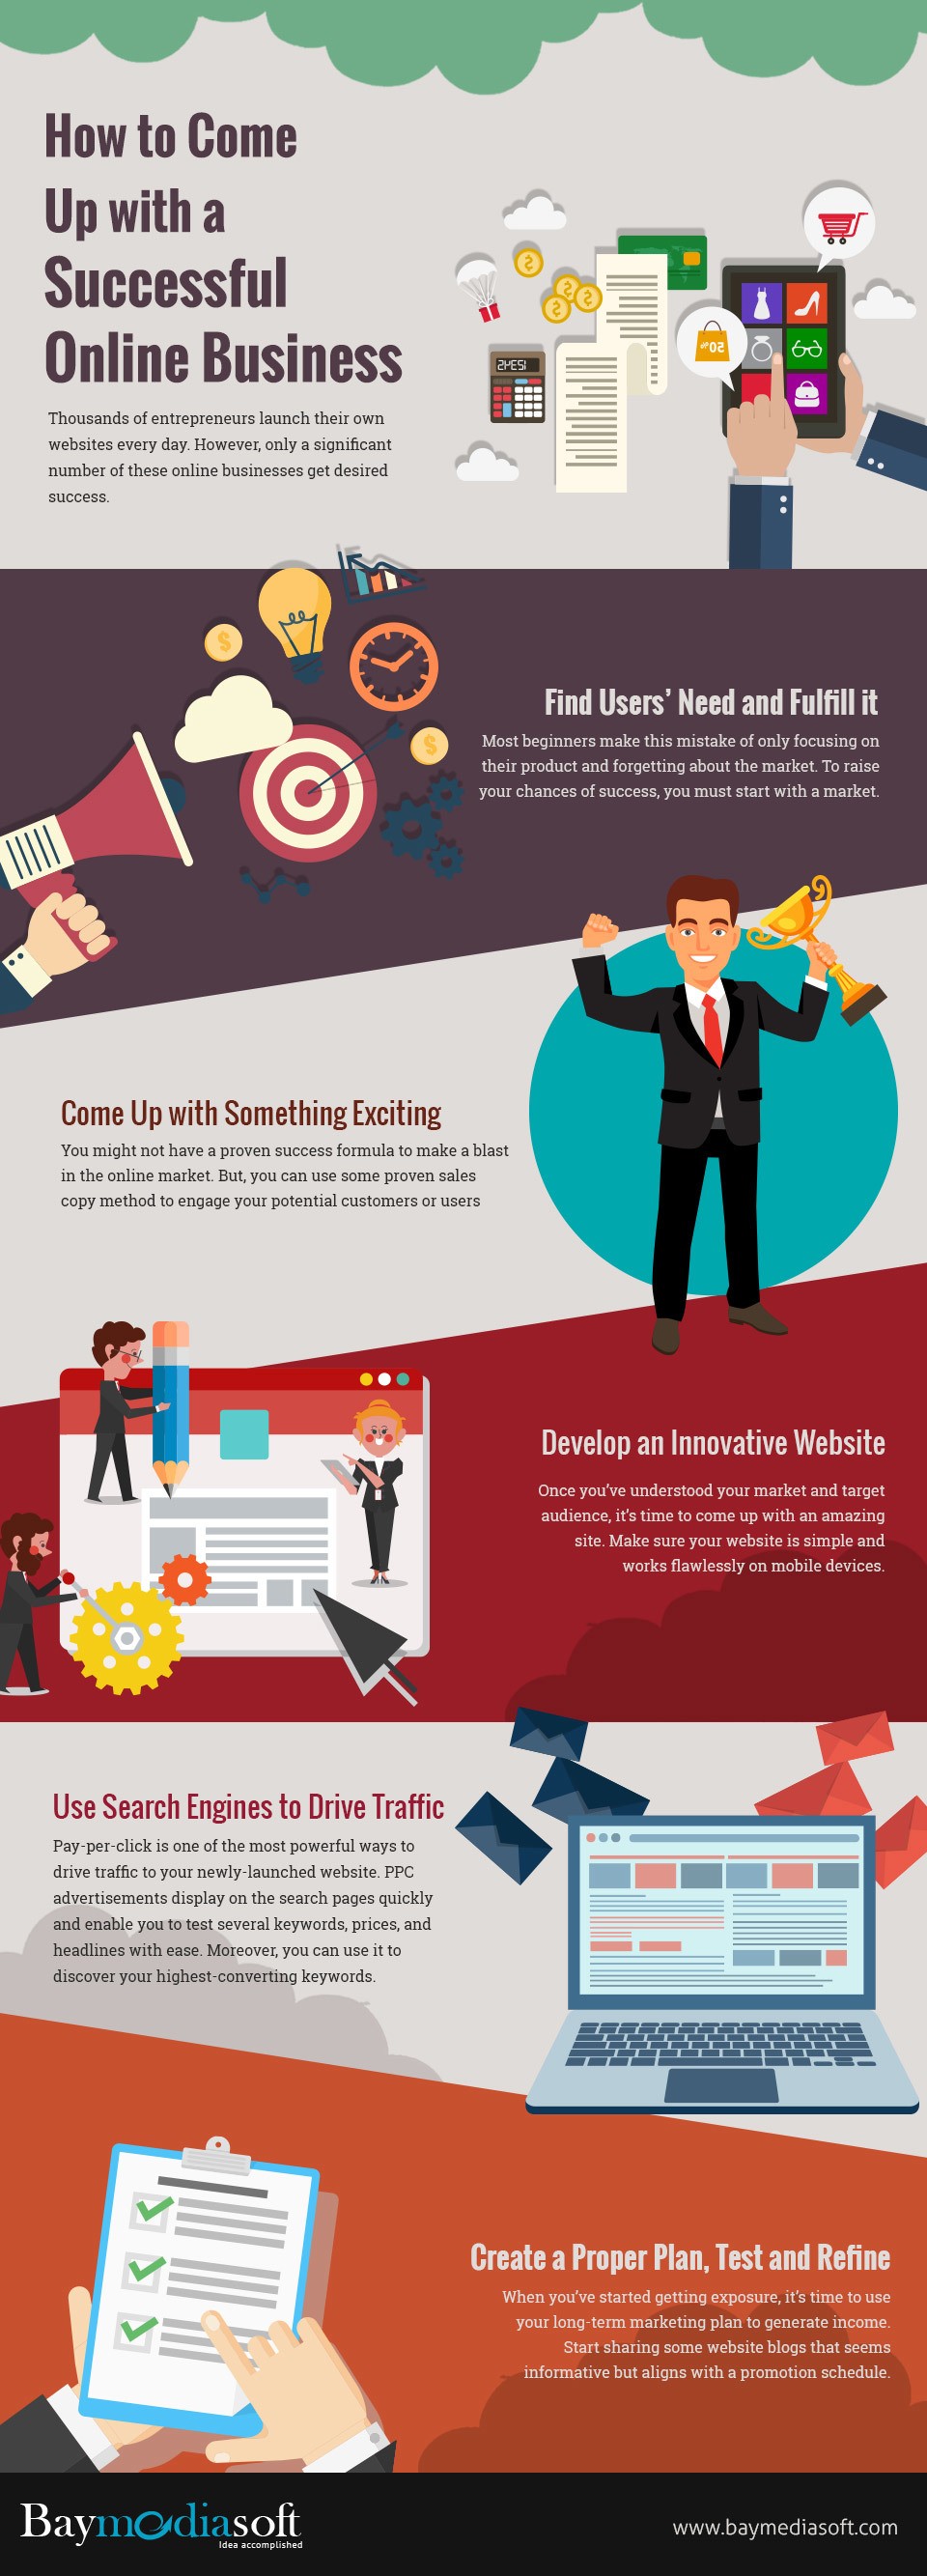 How To Come Up With A Successful Online Business Infographic